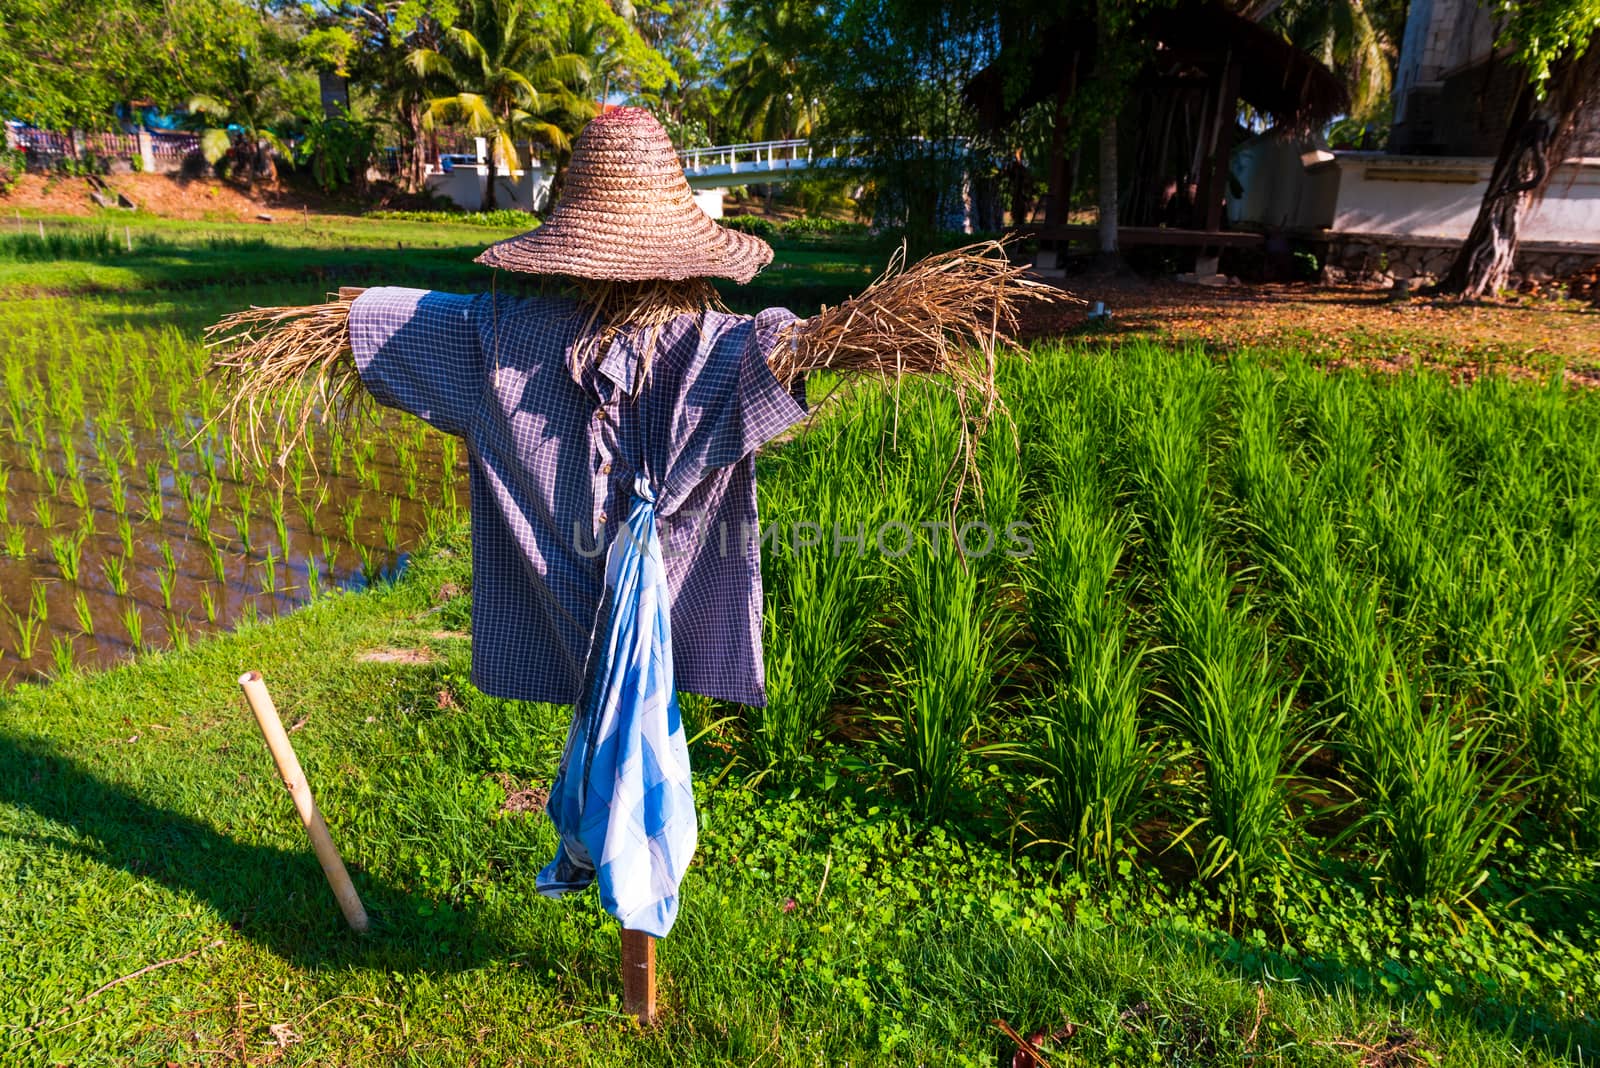 Scarecrow in a Rice Field by jfbenning